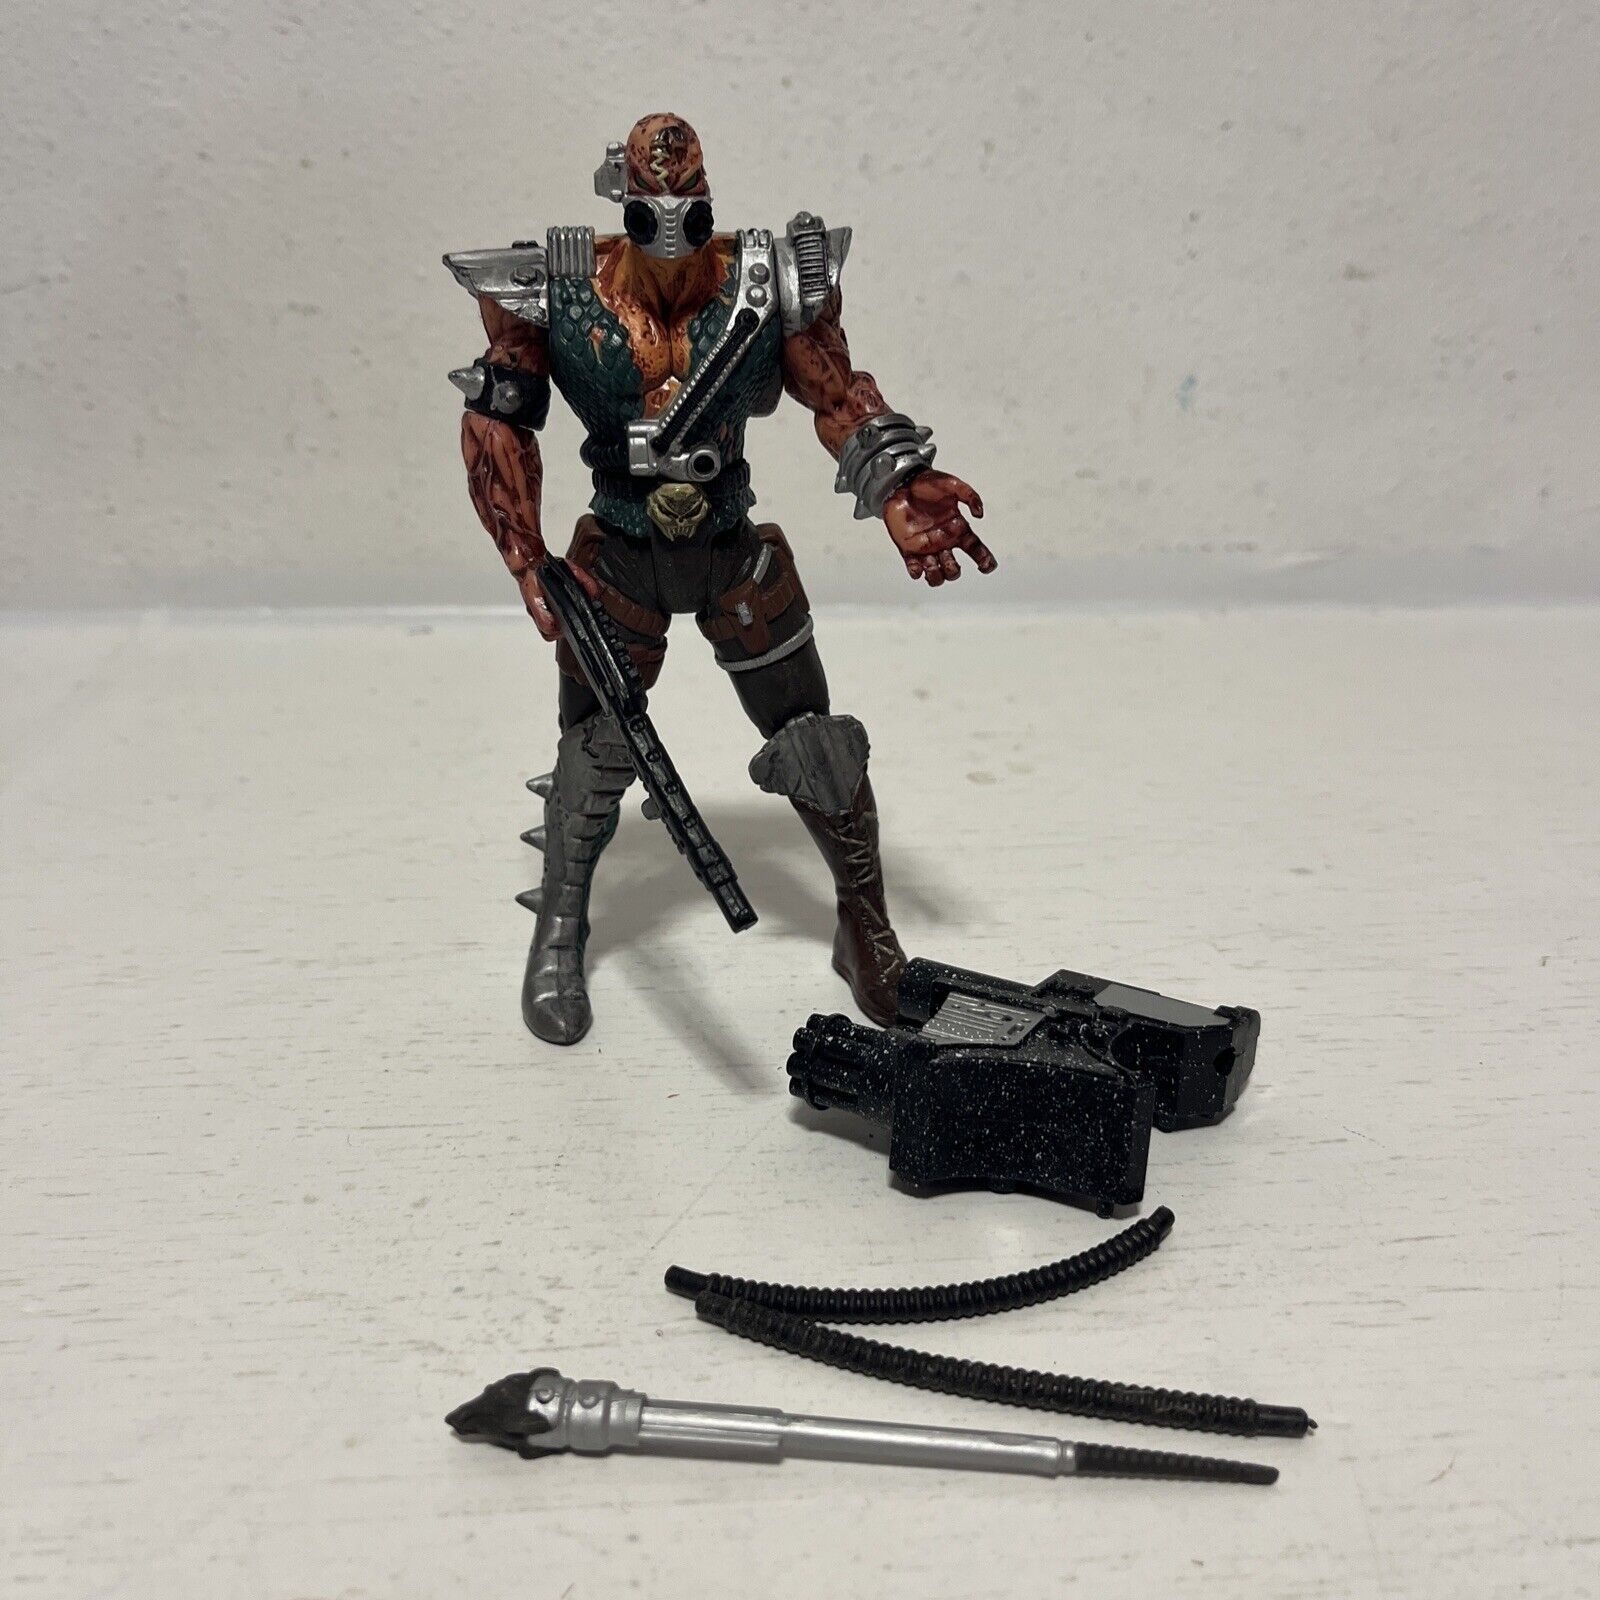 Primary image for Spawn Series 5 Nuclear Spawn 6" Figure w/ weapons McFarlane Toys 10143 1996